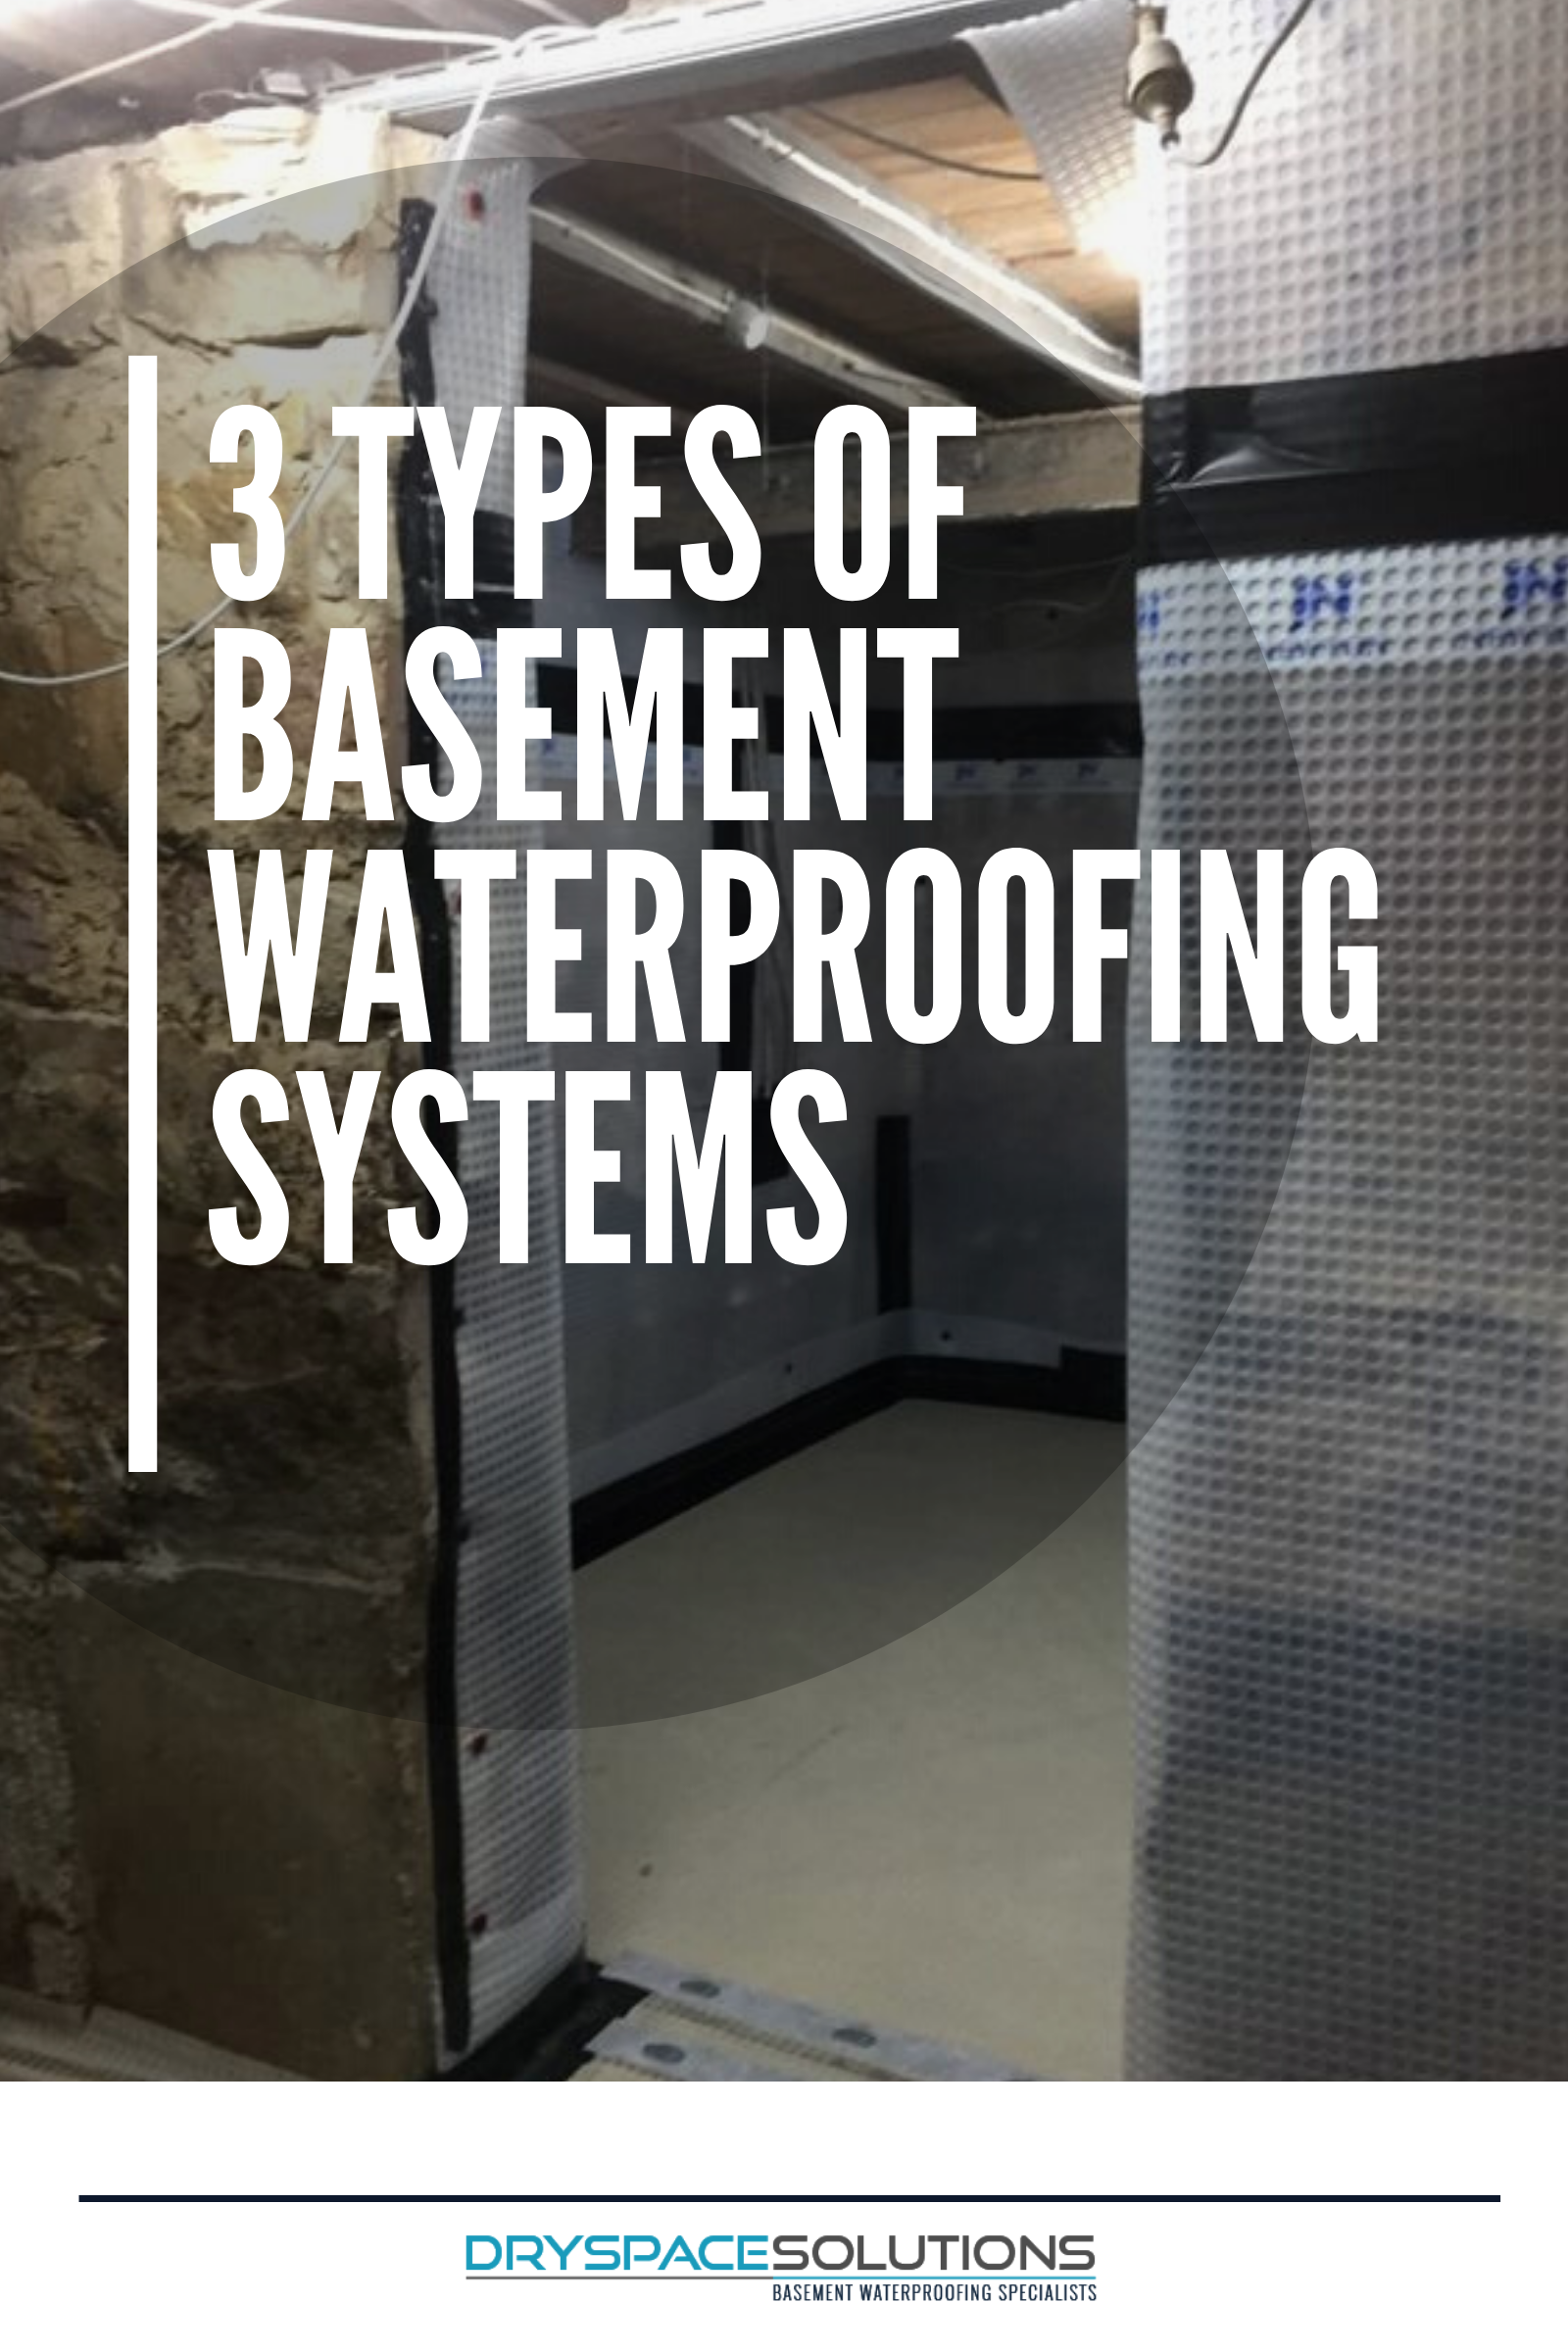 3 Types of Basement Waterproofing Systems